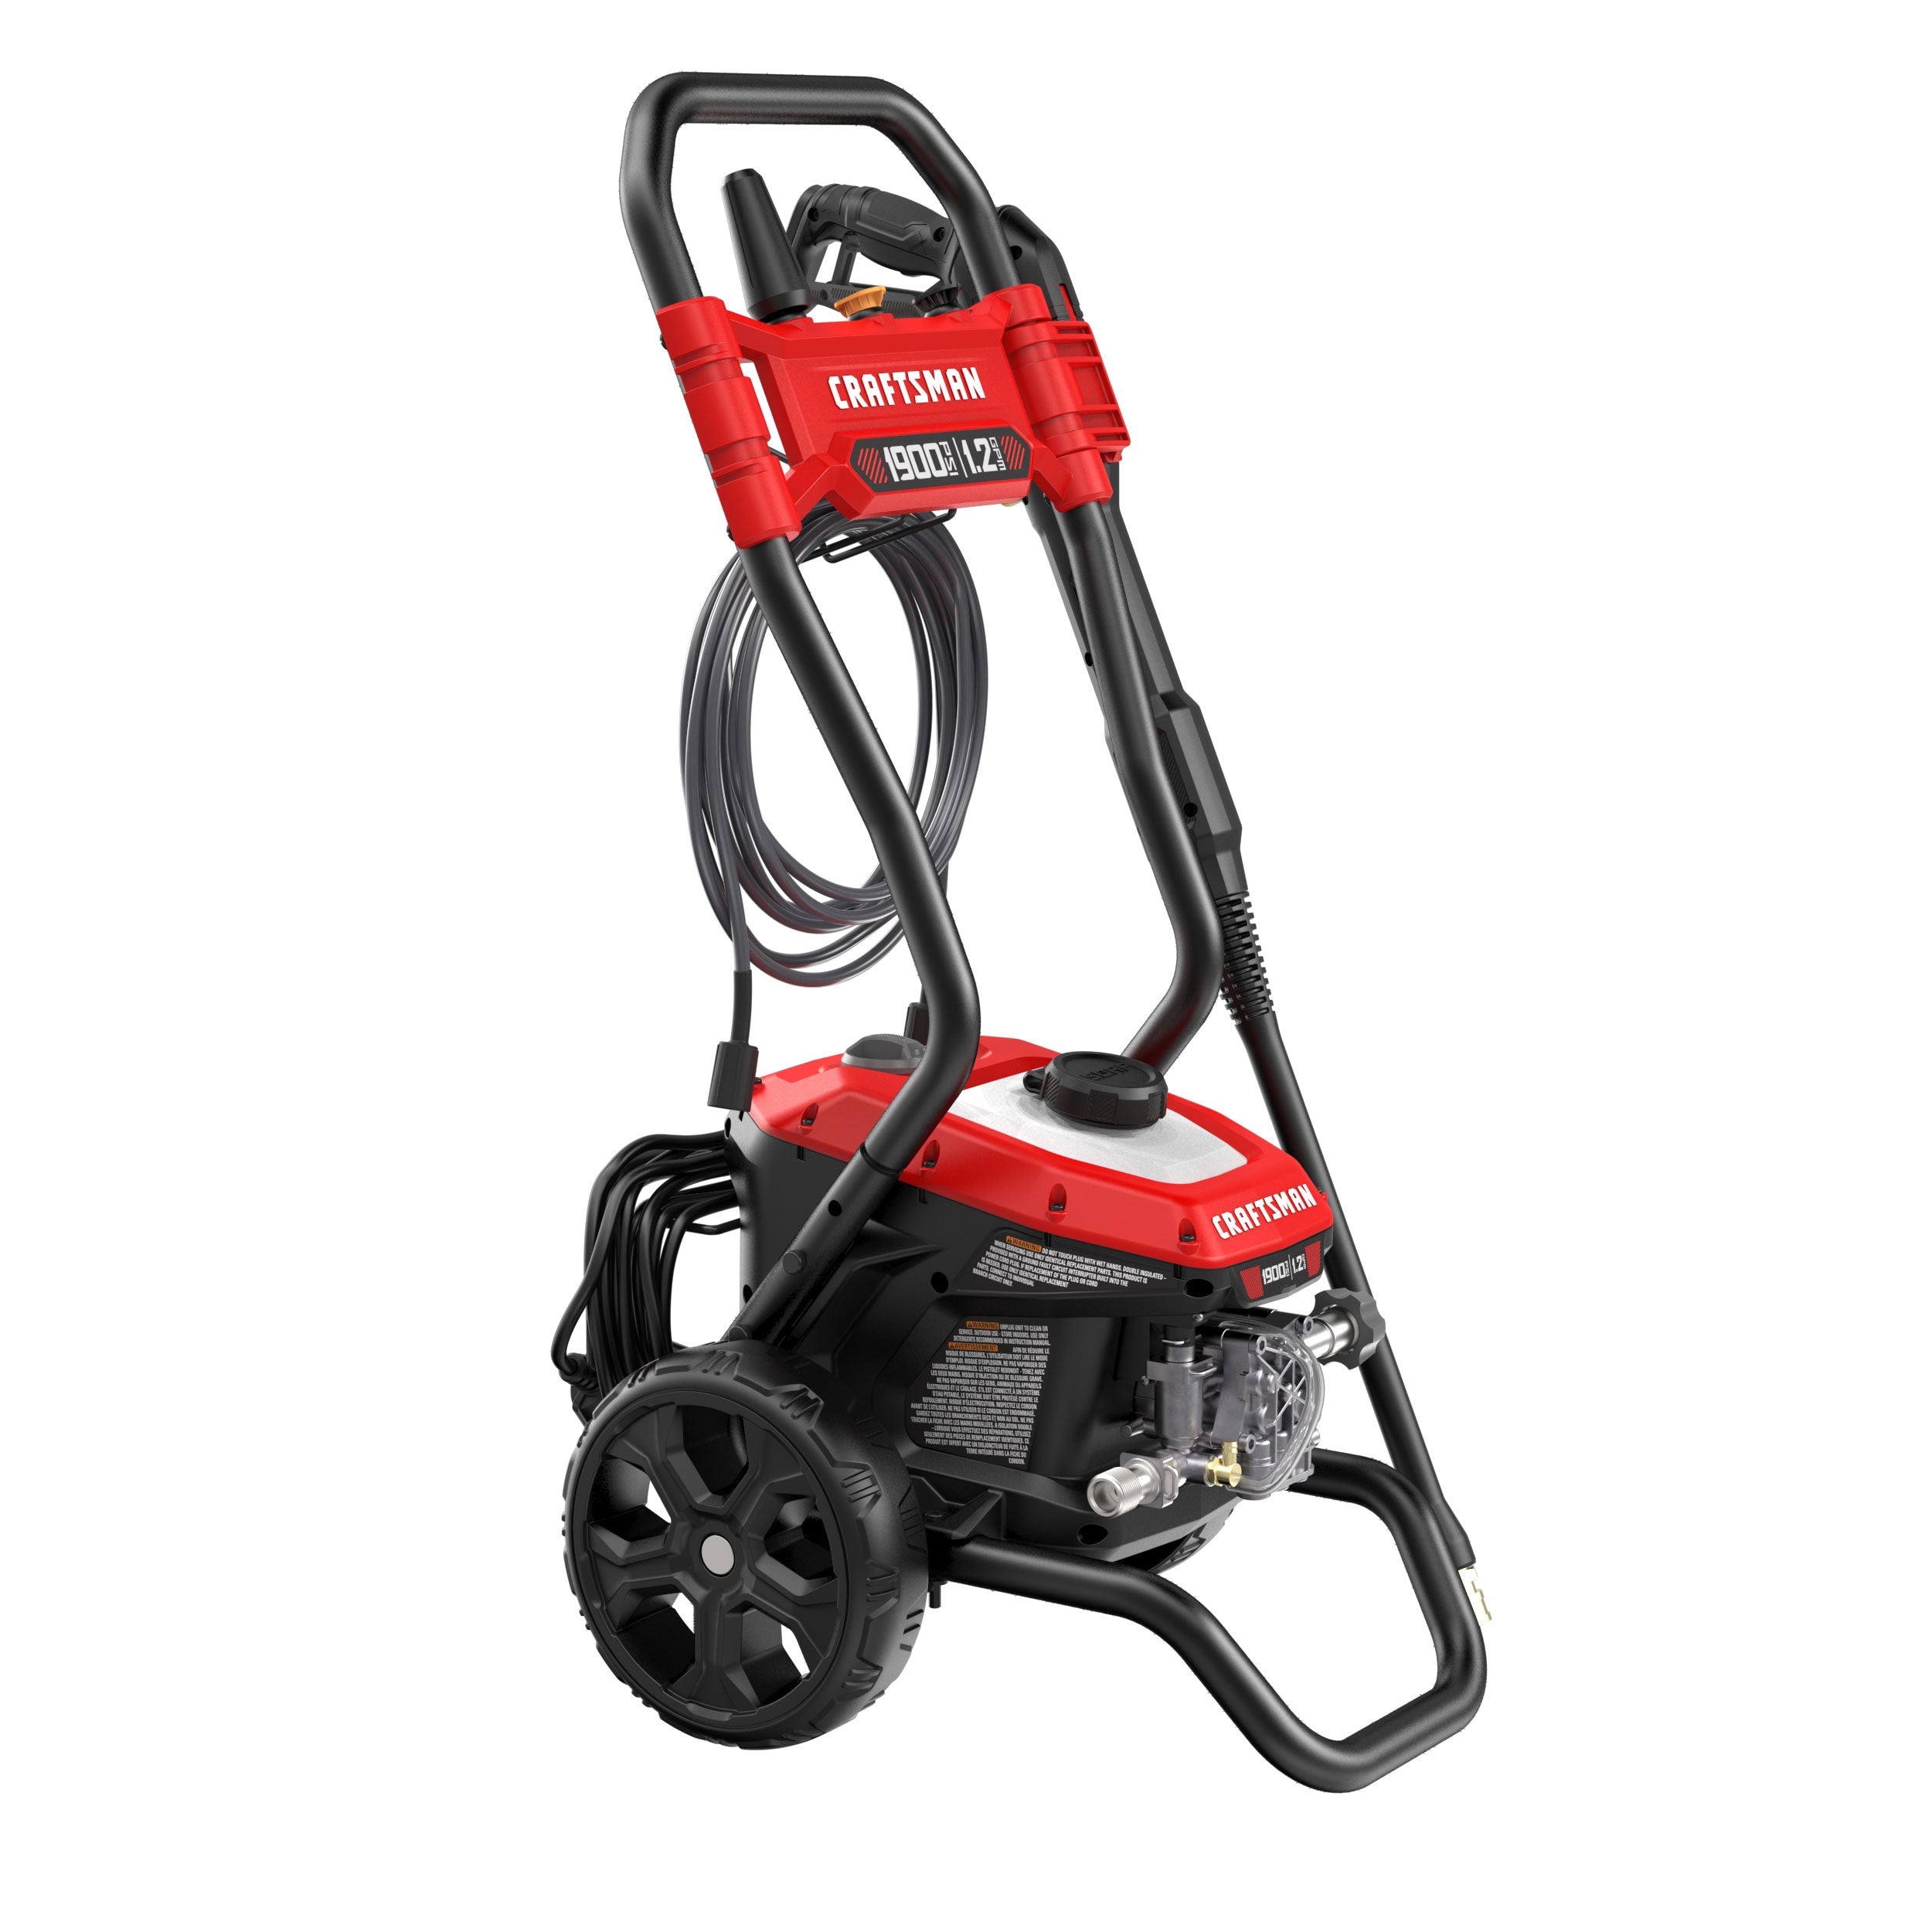 Craftsman Battery-Powered Pressure Washer – First Look